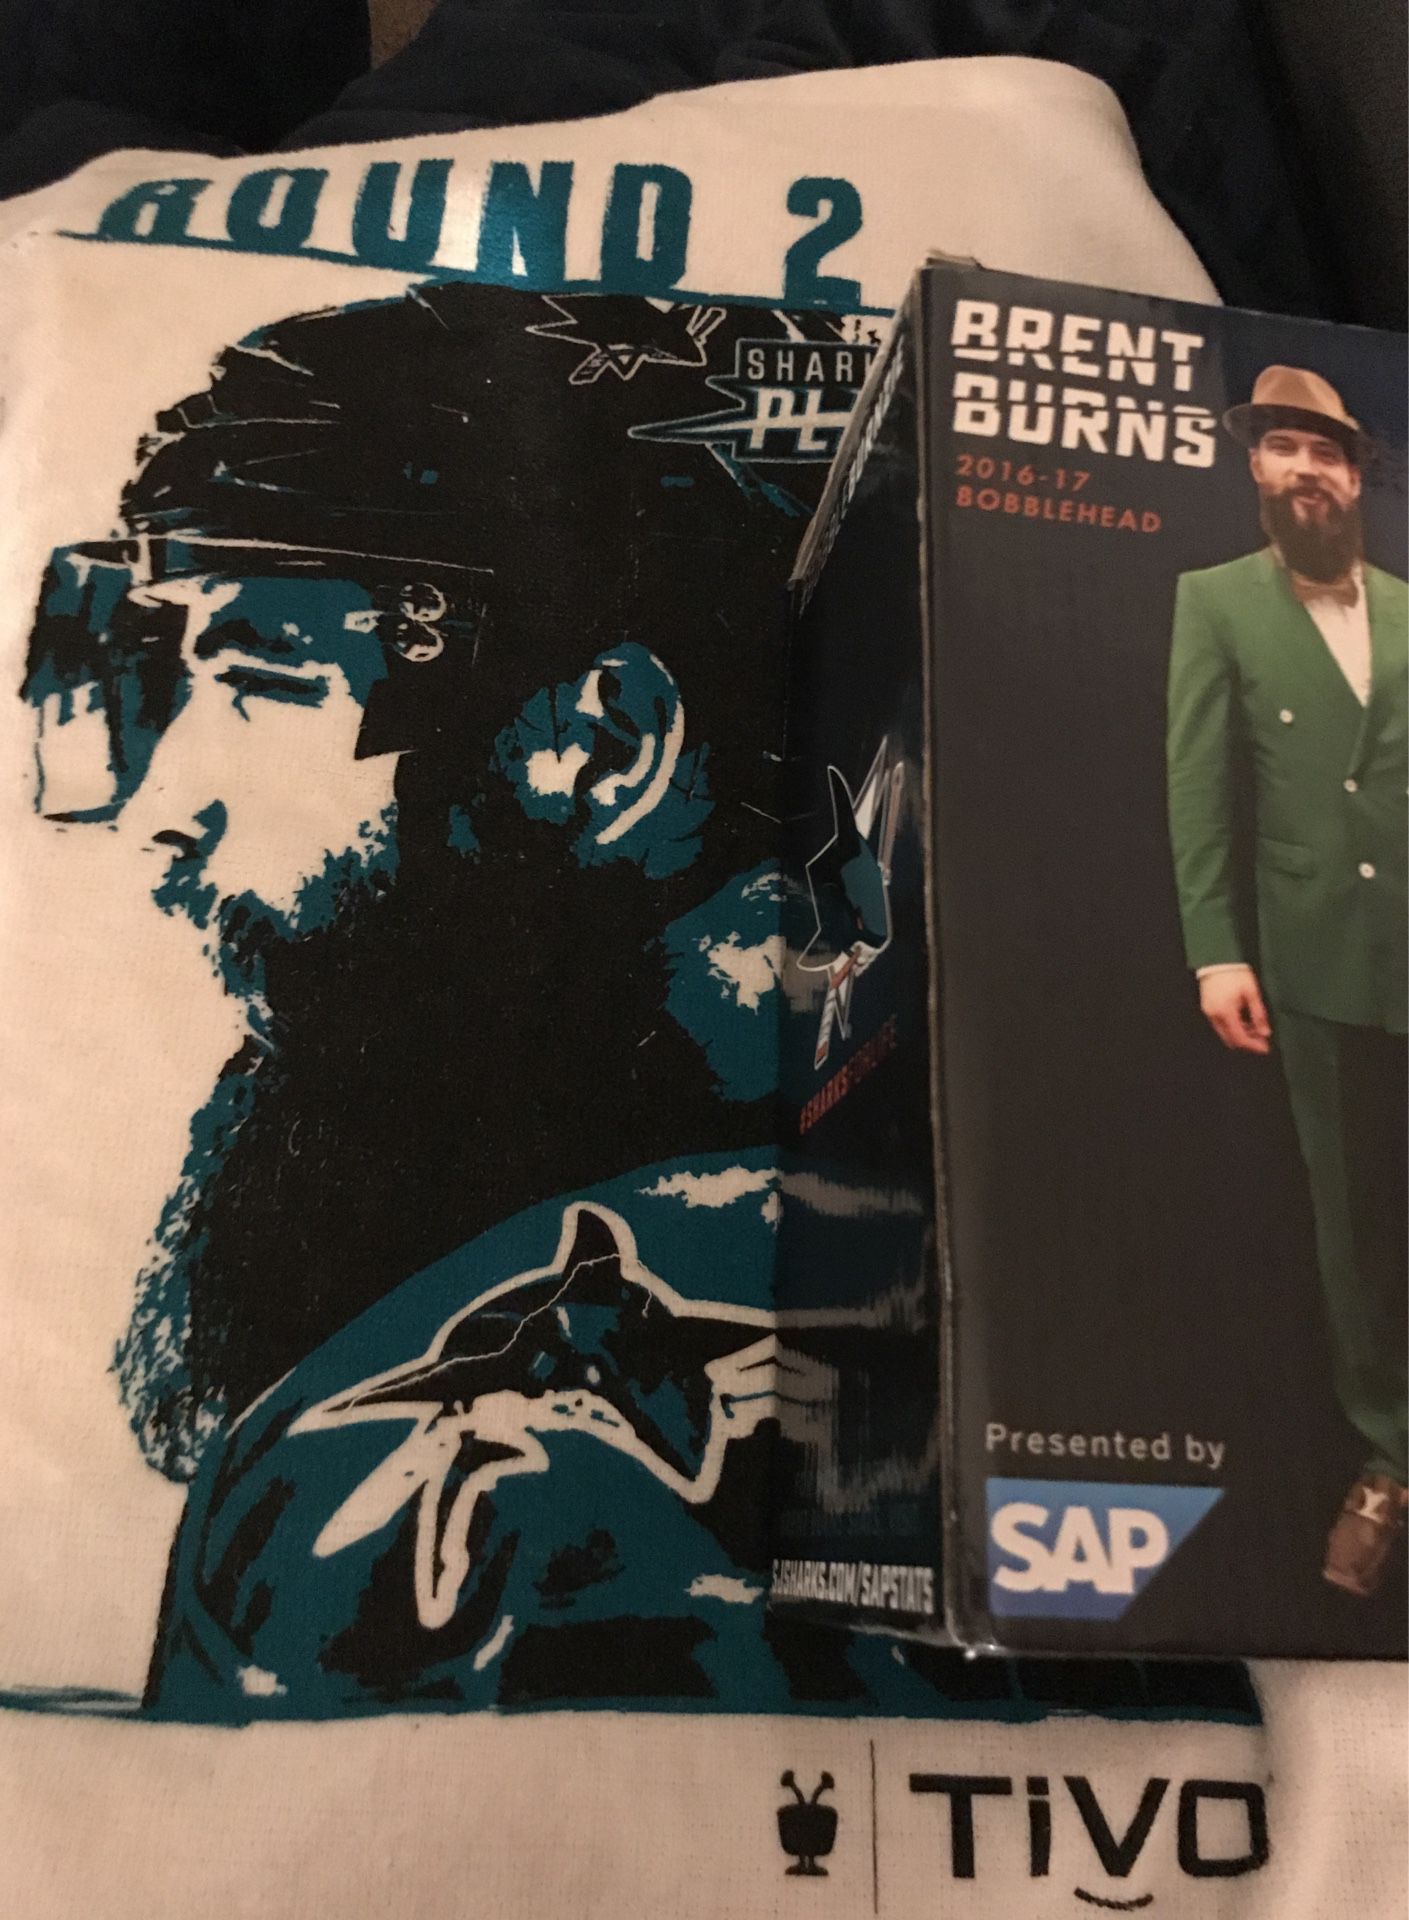 Brent Burns Bobble head for Sale in San Leandro, CA - OfferUp